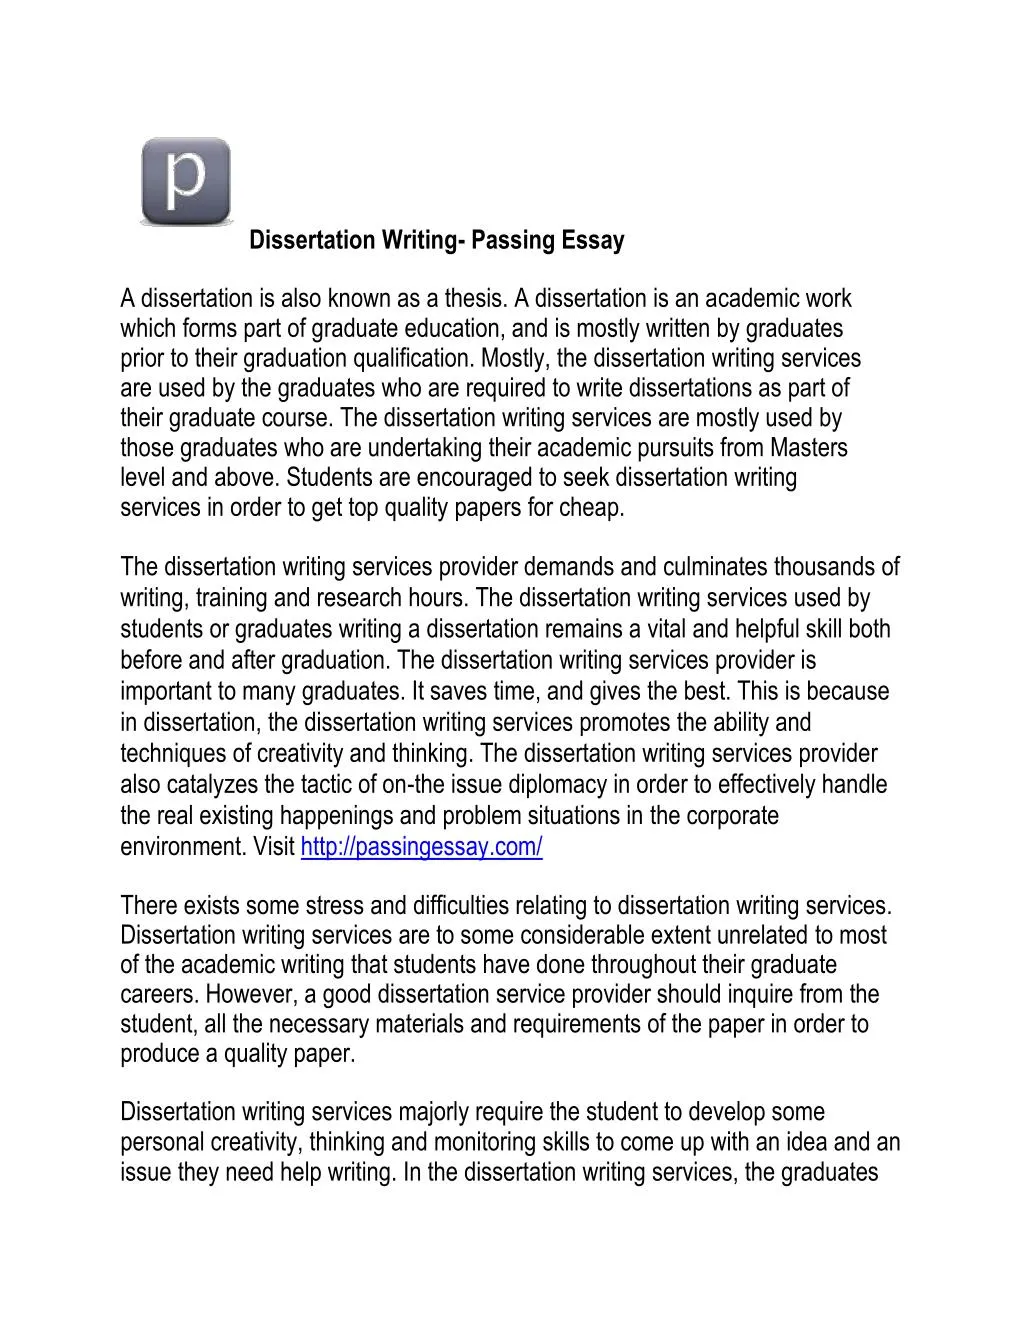 free dissertation writing services